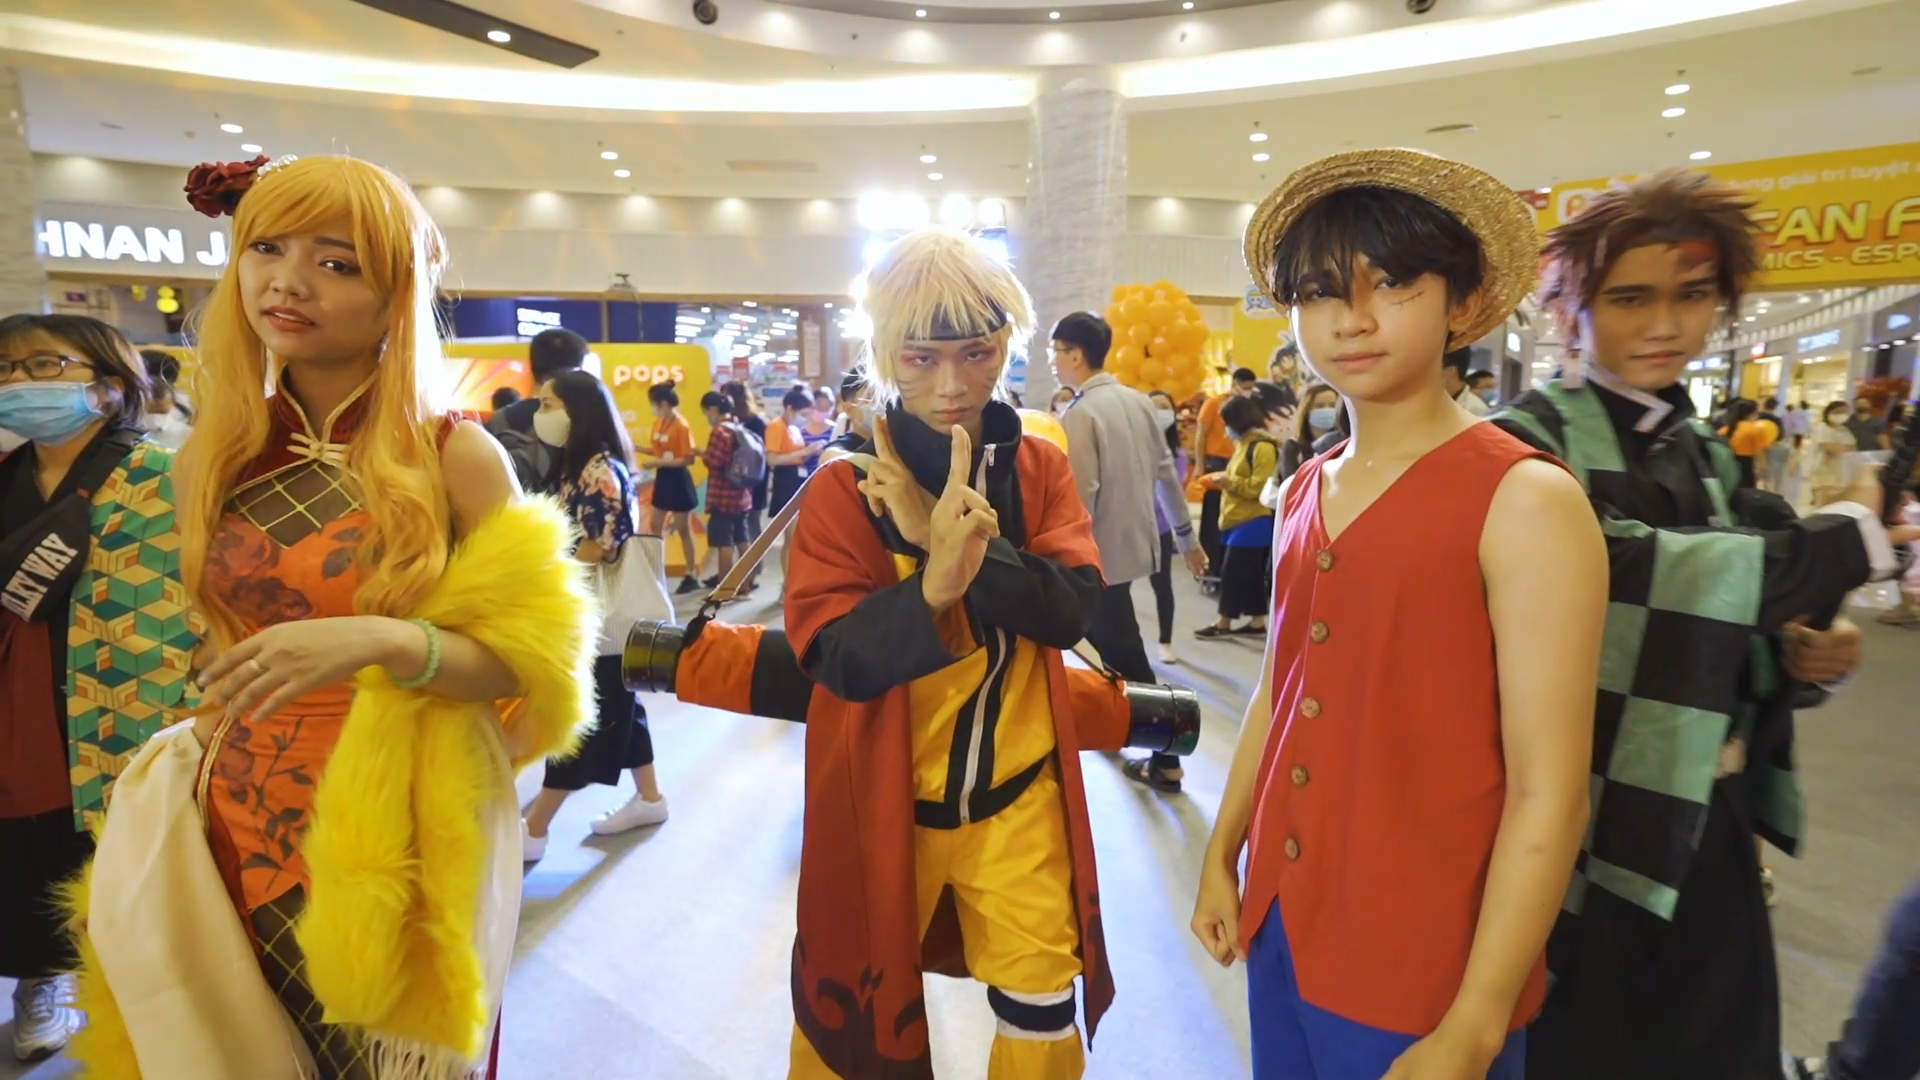 Chicago Anime Convention - Anime Midwest | Anime conventions, Anime  midwest, Anime